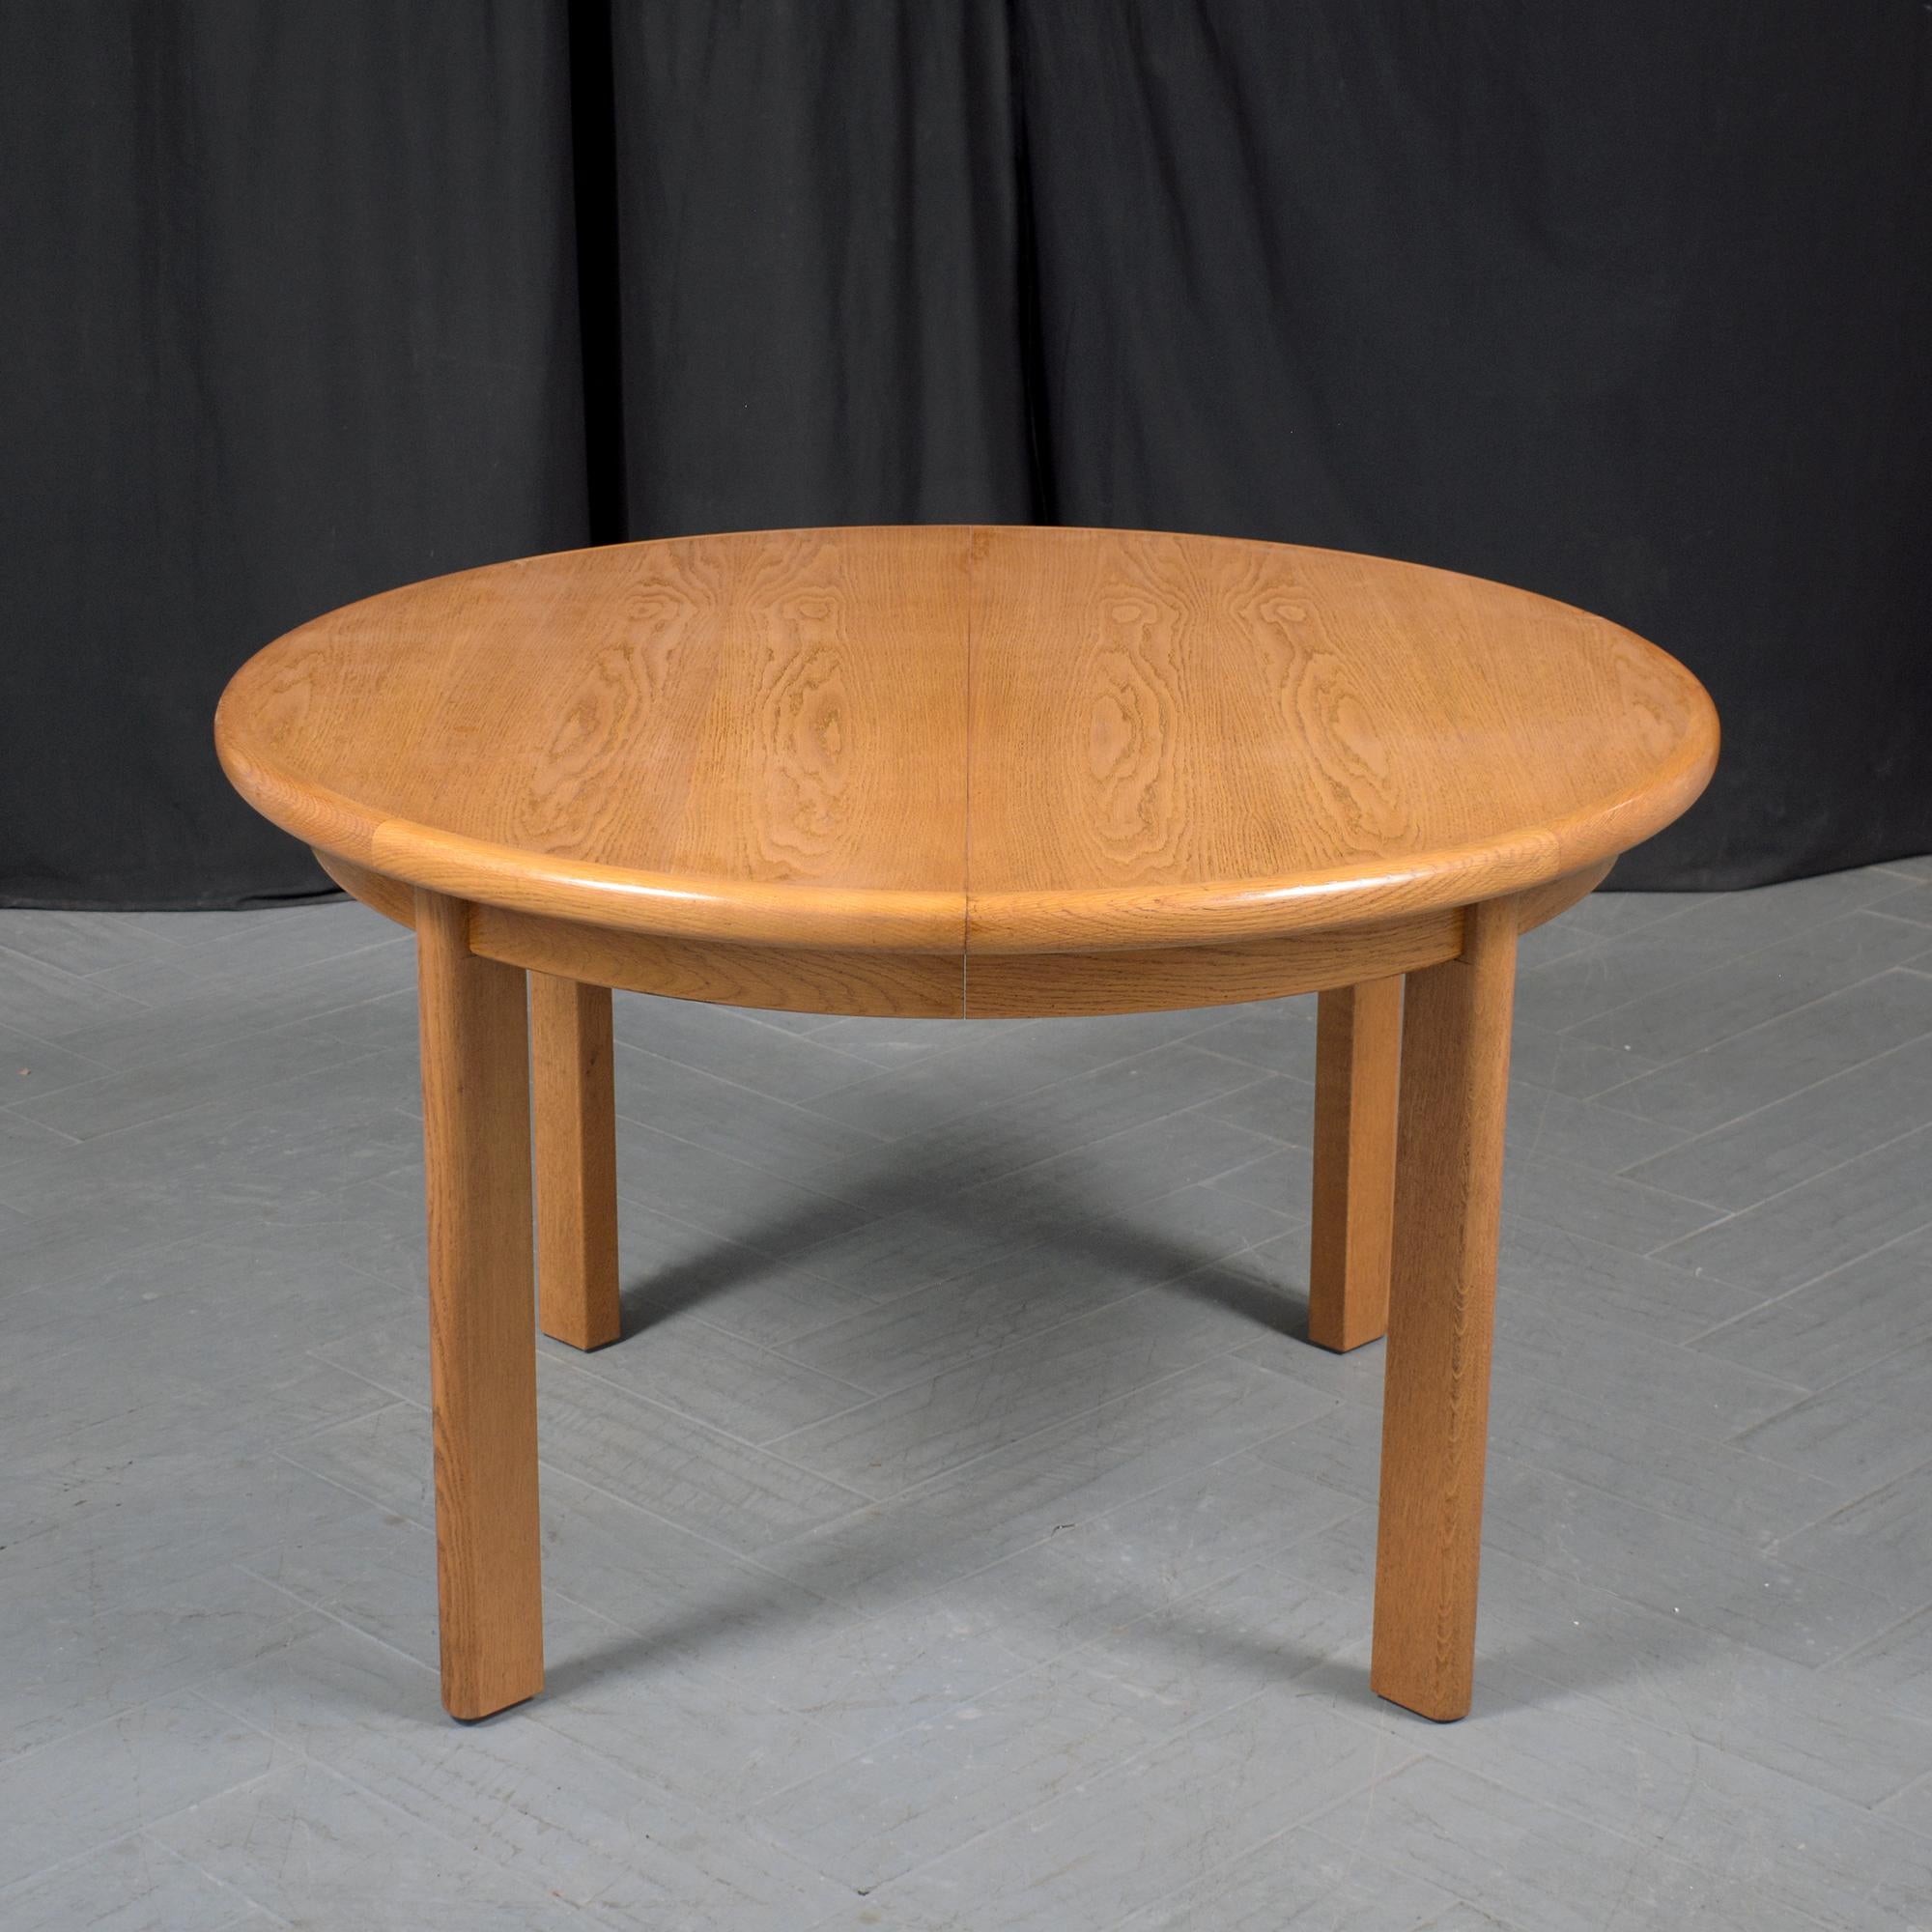 1970s Danish Modern Teak Dining Table with Extendable Leaves For Sale 5